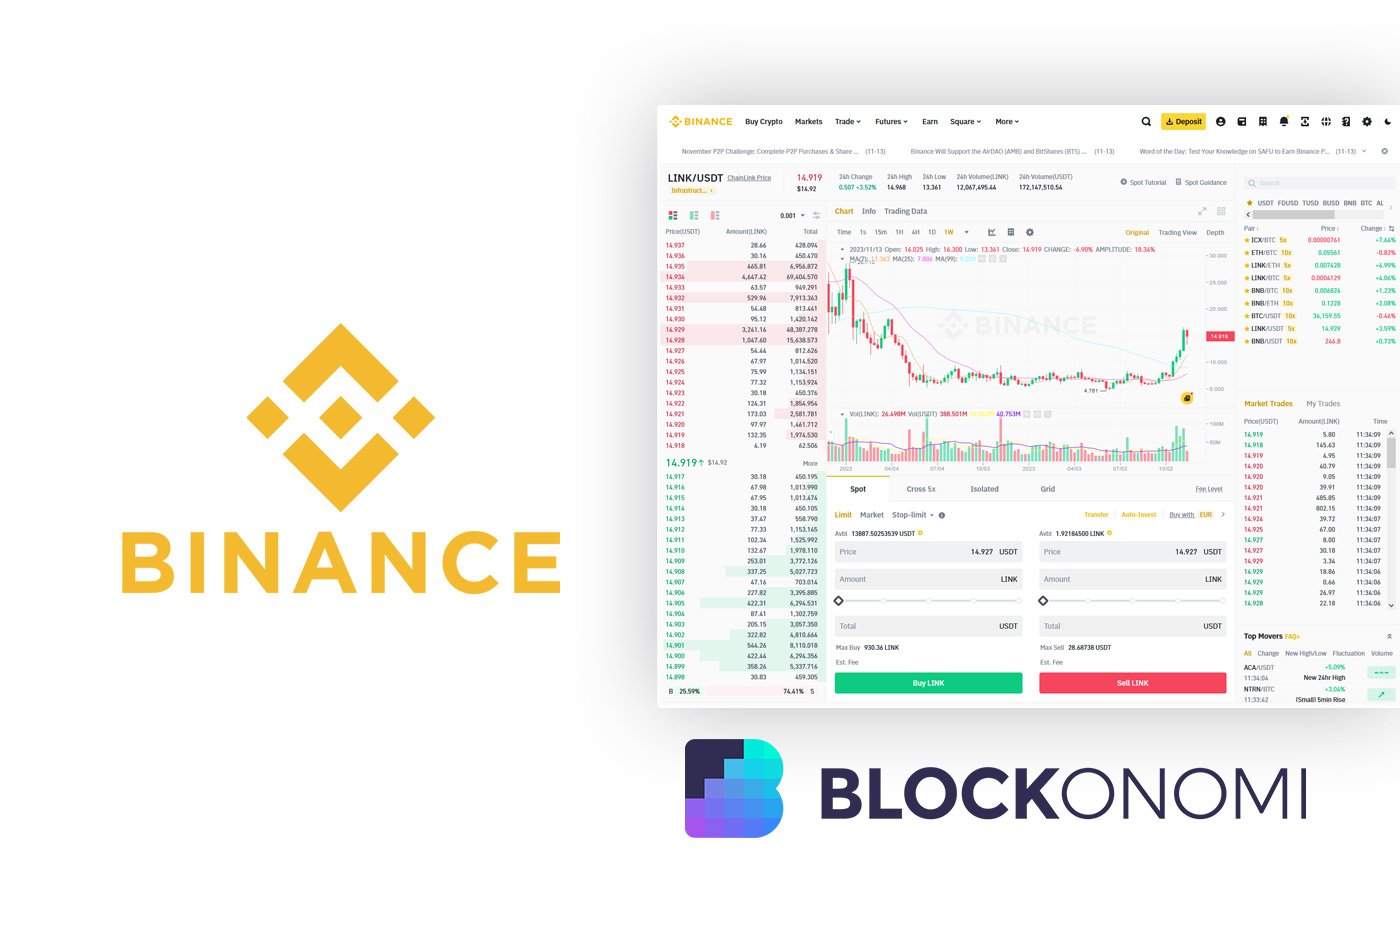 How Safe is Binance for Storing my Coins? - ChainSec